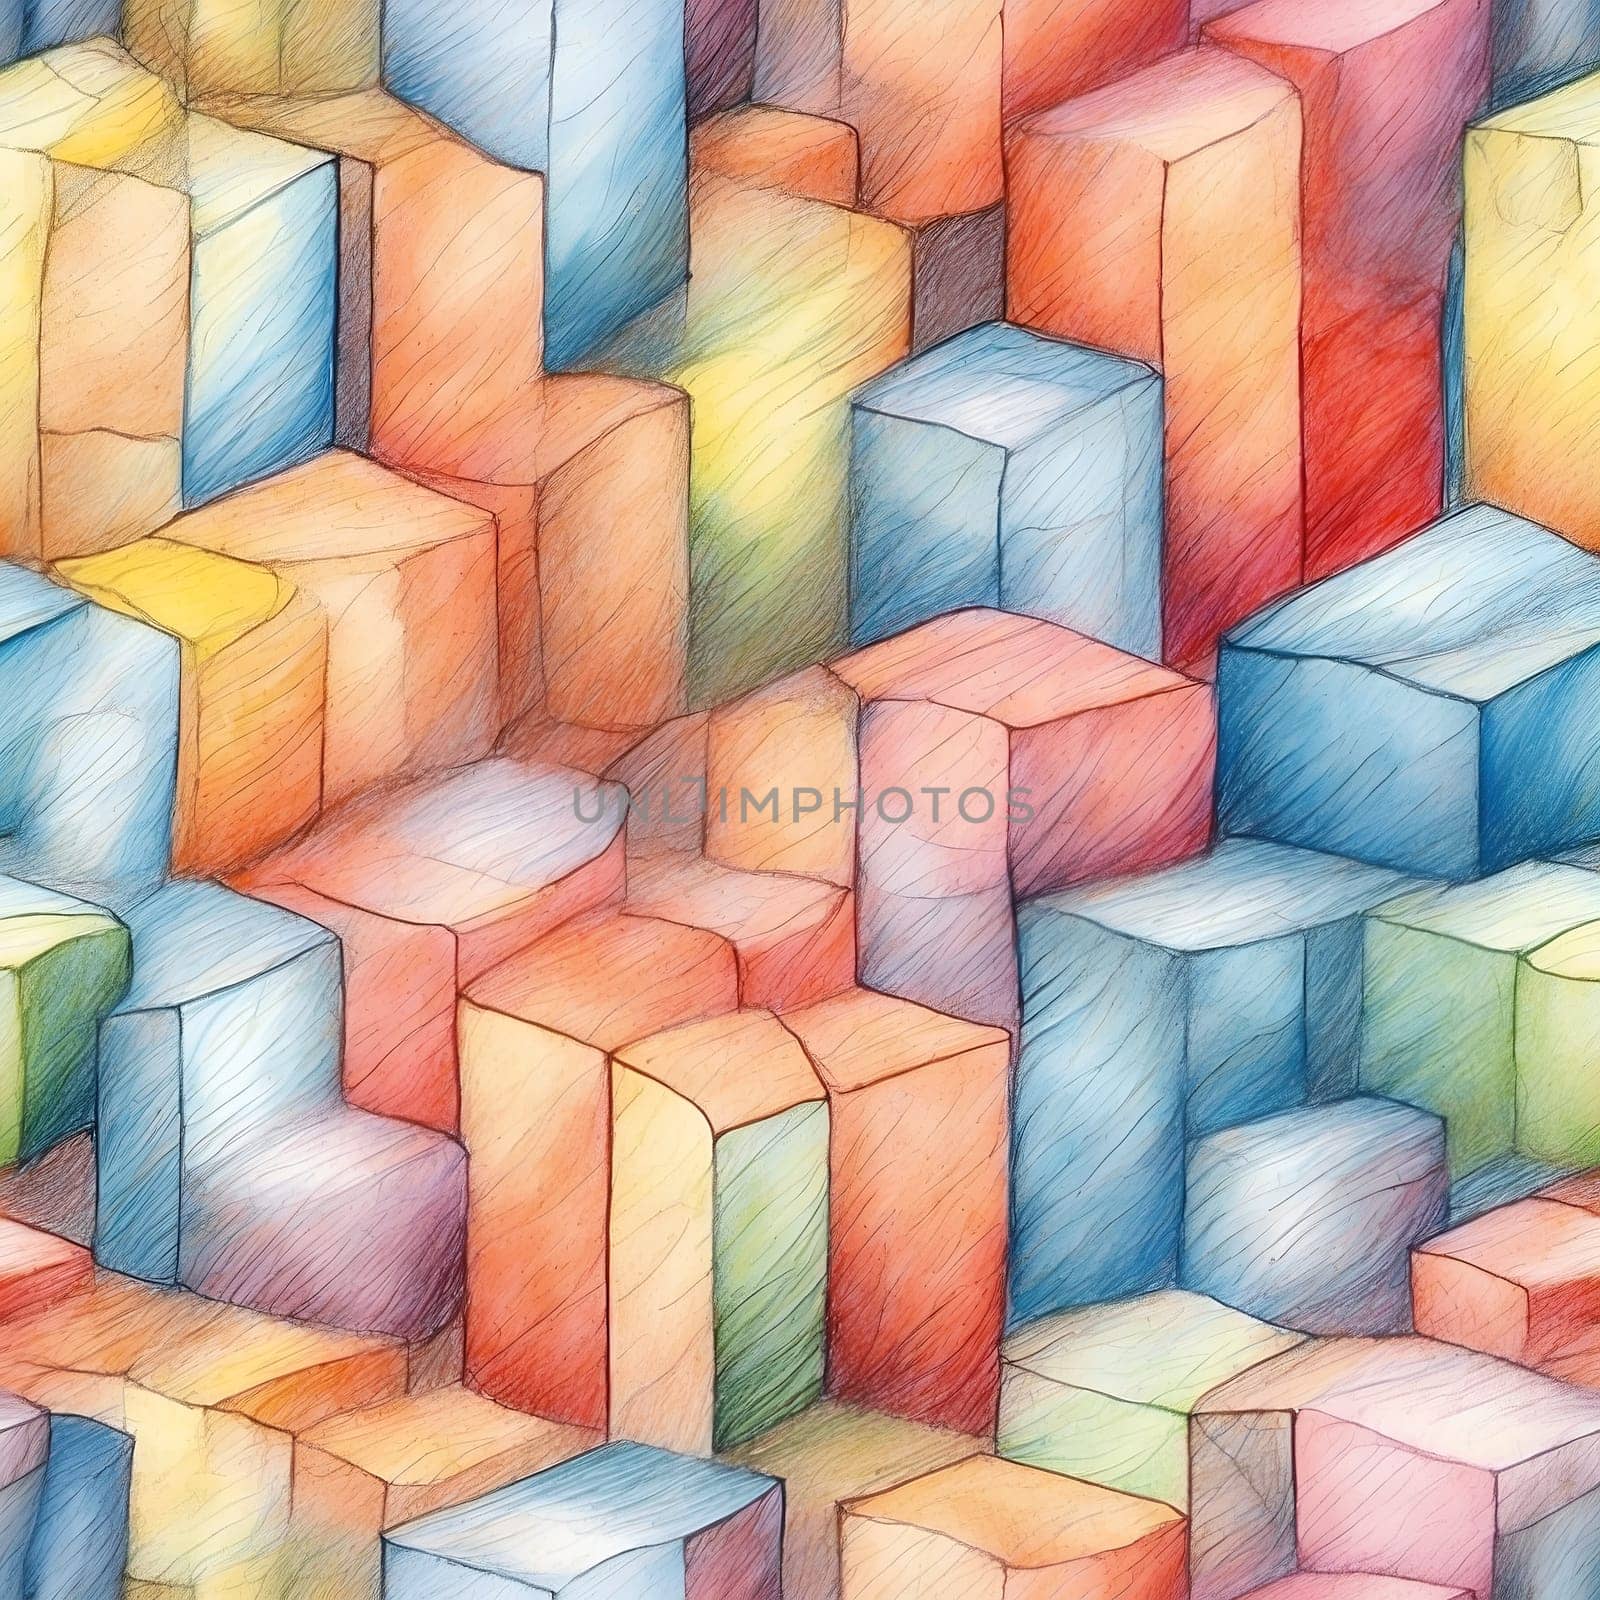 A seamless pattern drawing featuring a variety of cubes in pastel colors.